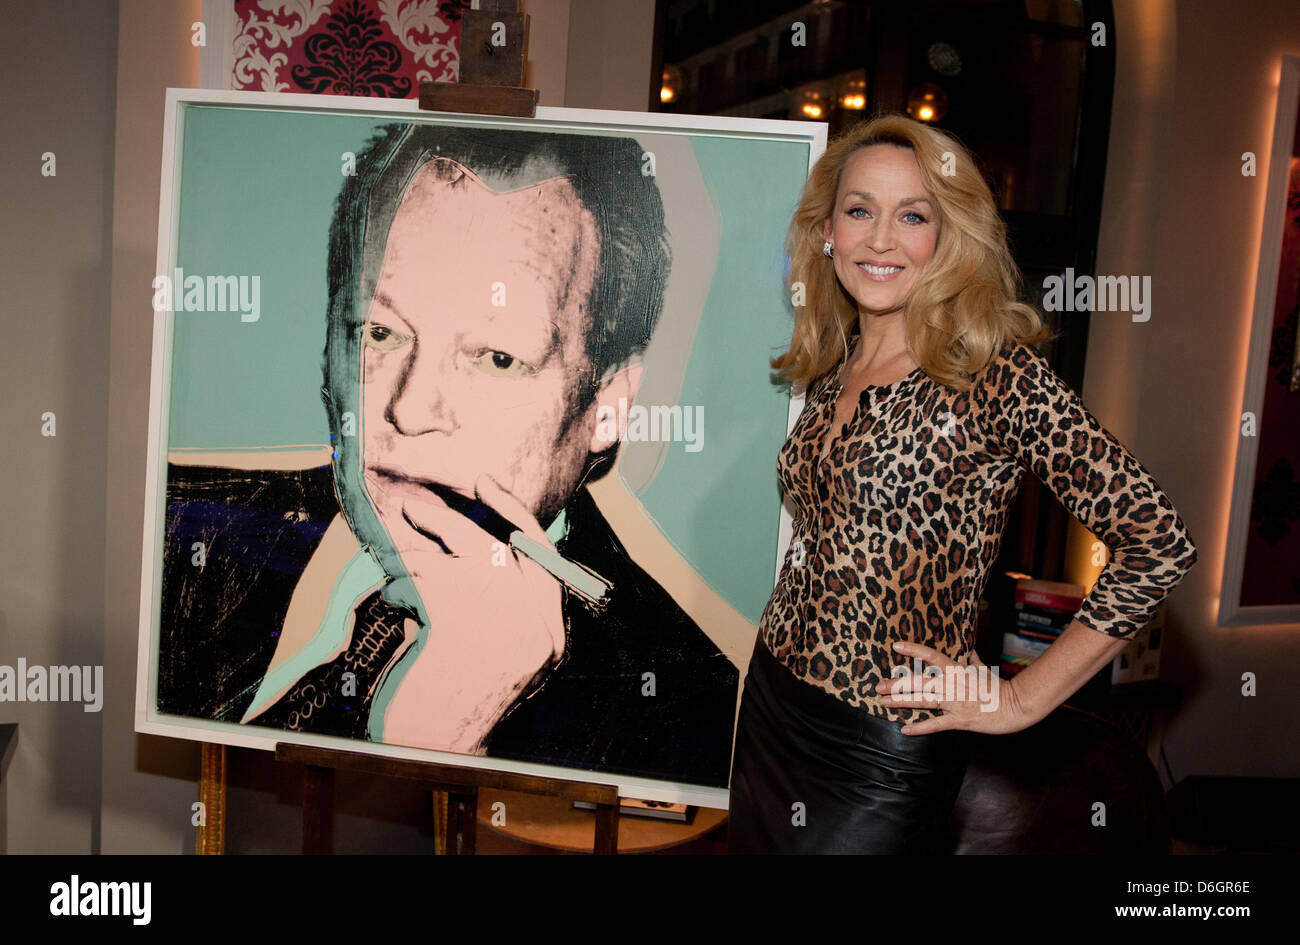 Jerry Hall, ex-wife of Mick Jagger, stands next to a portrait of former German Chancellor Willy Brandt by the artist Andy Warhol during the talkshow 'Gottschalk live' of TV presenter and host Thomas Gottschalk in Berlin, Germany, 22 February 2012. it is the 25th anniversary of Warhol's death. Photo: Joerg Carstensen Stock Photo